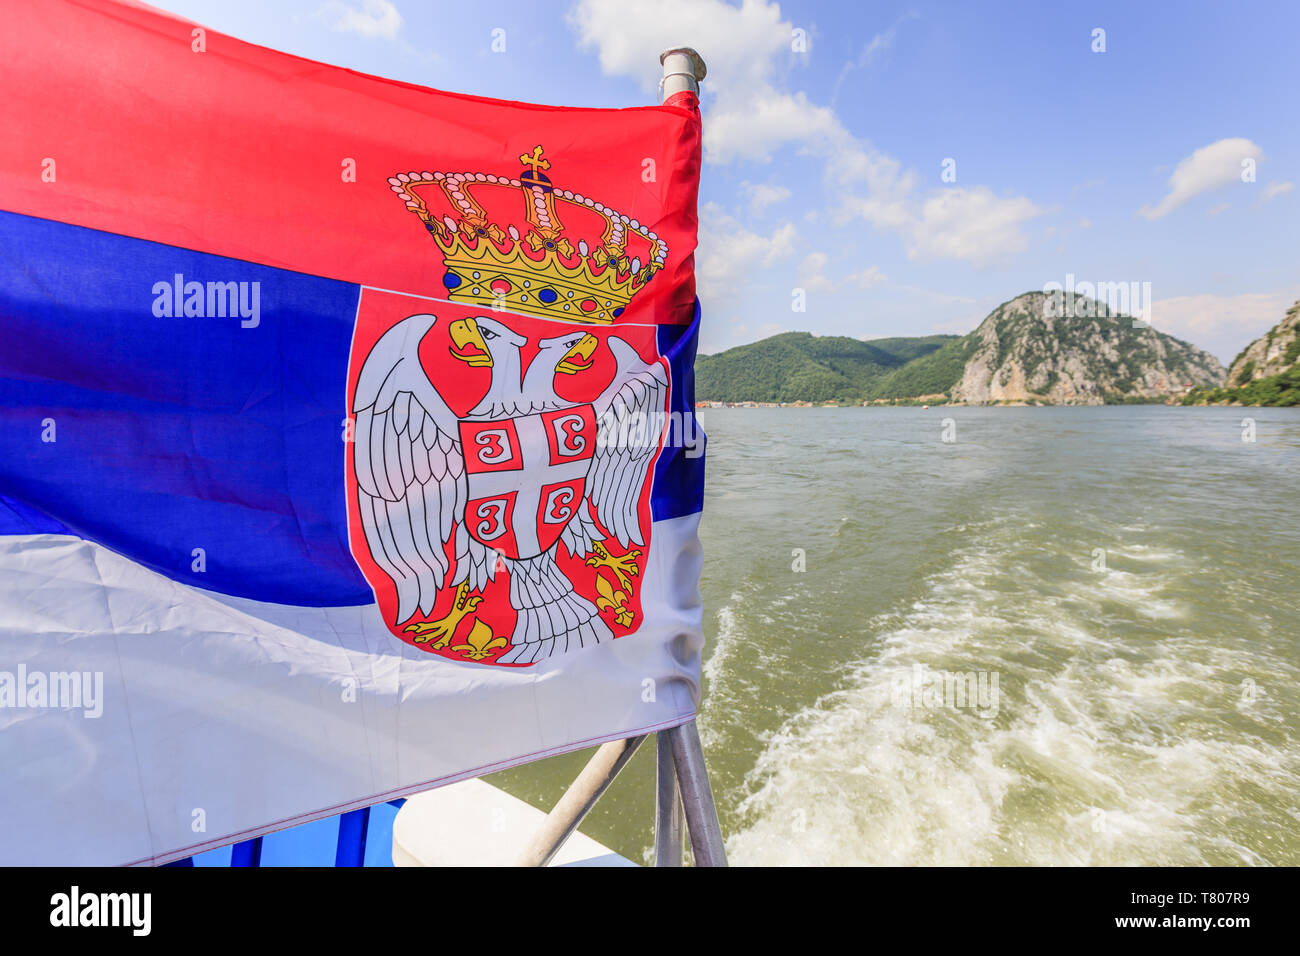 Serbia national flag on tourist boat , Danube river landscape and sky with clouds in background Stock Photo